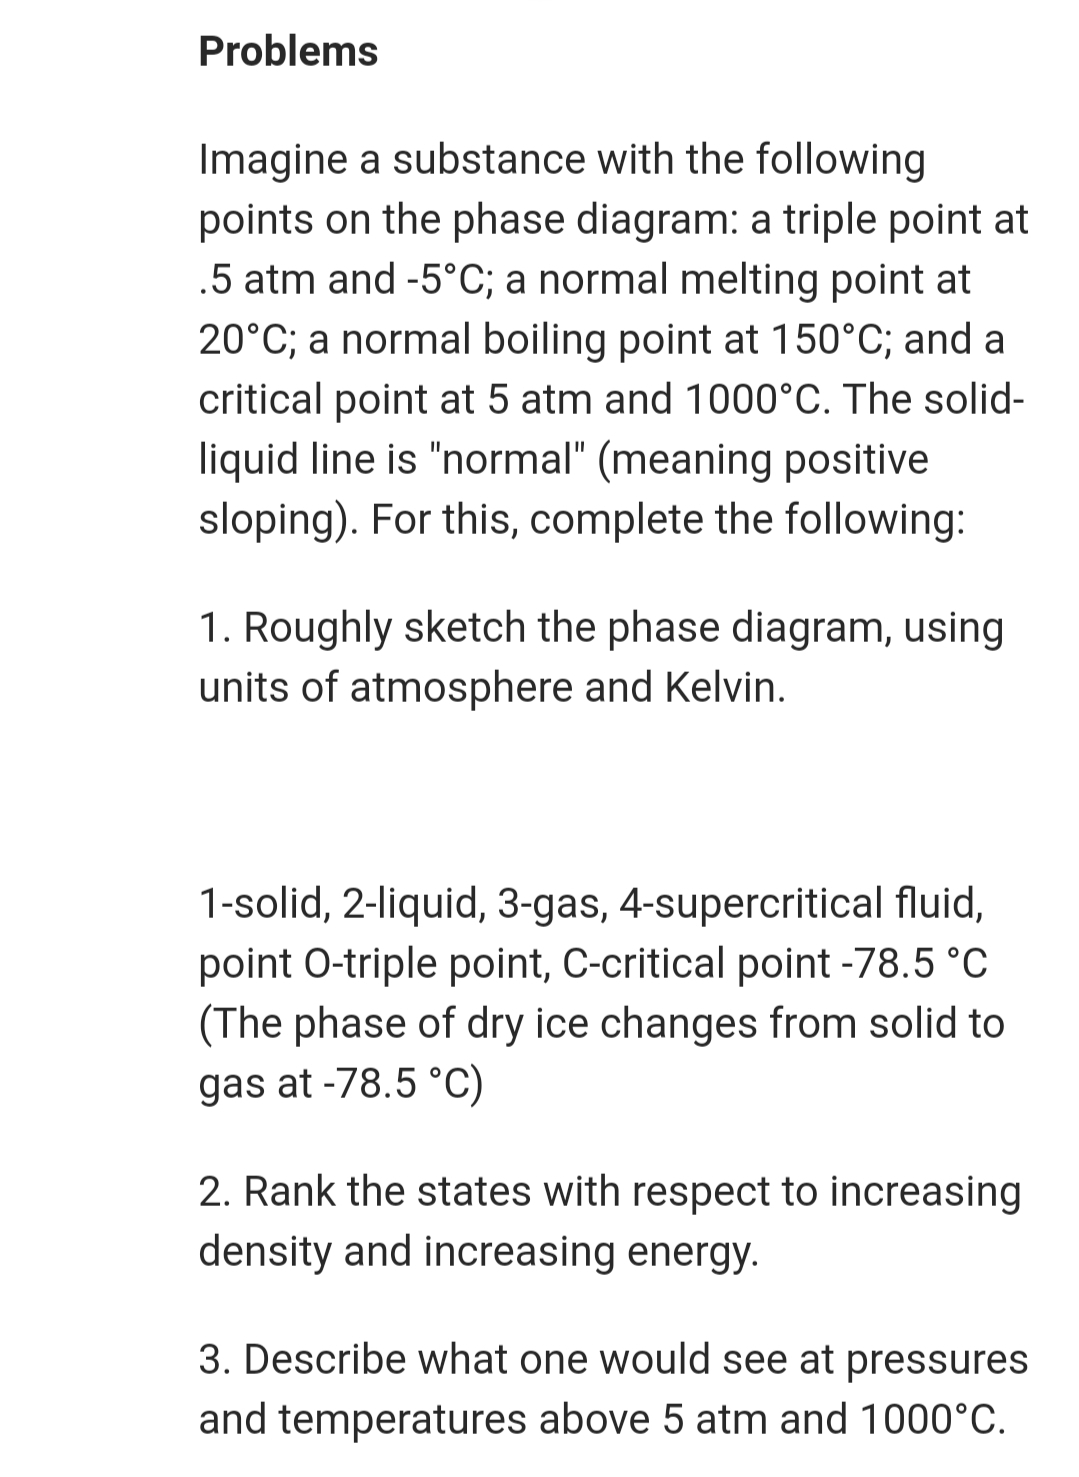 Problems
Imagine a substance with the following
points on the phase diagram: a triple point at
.5 atm and -5°C; a normal melting point at
20°C; a normal boiling point at 150°C; and a
critical point at 5 atm and 1000°C. The solid-
liquid line is "normal" (meaning positive
sloping). For this, complete the following:
1. Roughly sketch the phase diagram, using
units of atmosphere and Kelvin.
1-solid, 2-liquid, 3-gas, 4-supercritical fluid,
point O-triple point, C-critical point -78.5 °C
(The phase of dry ice changes from solid to
gas at -78.5 °C)
2. Rank the states with respect to increasing
density and increasing energy.
3. Describe what one would see at pressures
and temperatures above 5 atm and 1000°C.
